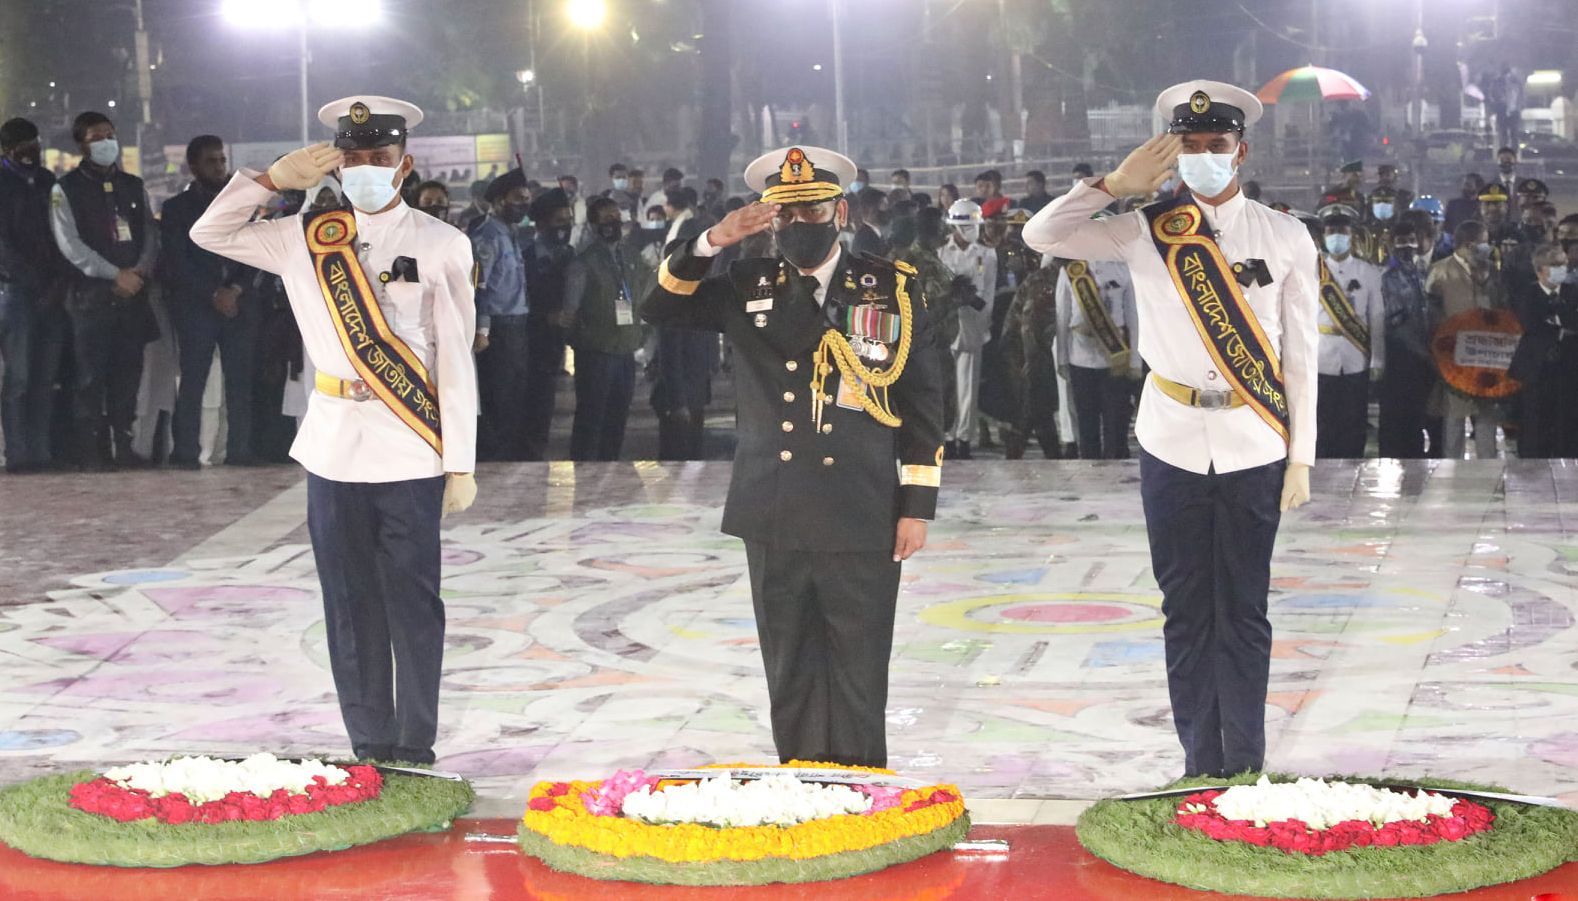 On behalf of Jatiya Sangsad (JS) Speaker Dr Shirin Sharmin
Chaudhury, sergeant-at-arms of the Parliament Secretariat and on
behalf of JS Deputy Speaker Fazle Rabbi Miah, assistant
sergeant-at-arms; on behalf of Chief of Army Staff General SM
Shafiuddin Ahmed, senior army officials, Chief of Naval Staff Admiral
M Shaheen Iqbal and Chief of Air Staff Air Chief Marshal Shaikh Abdul
Hannan placed wreaths at the Central Shaheed Minar.